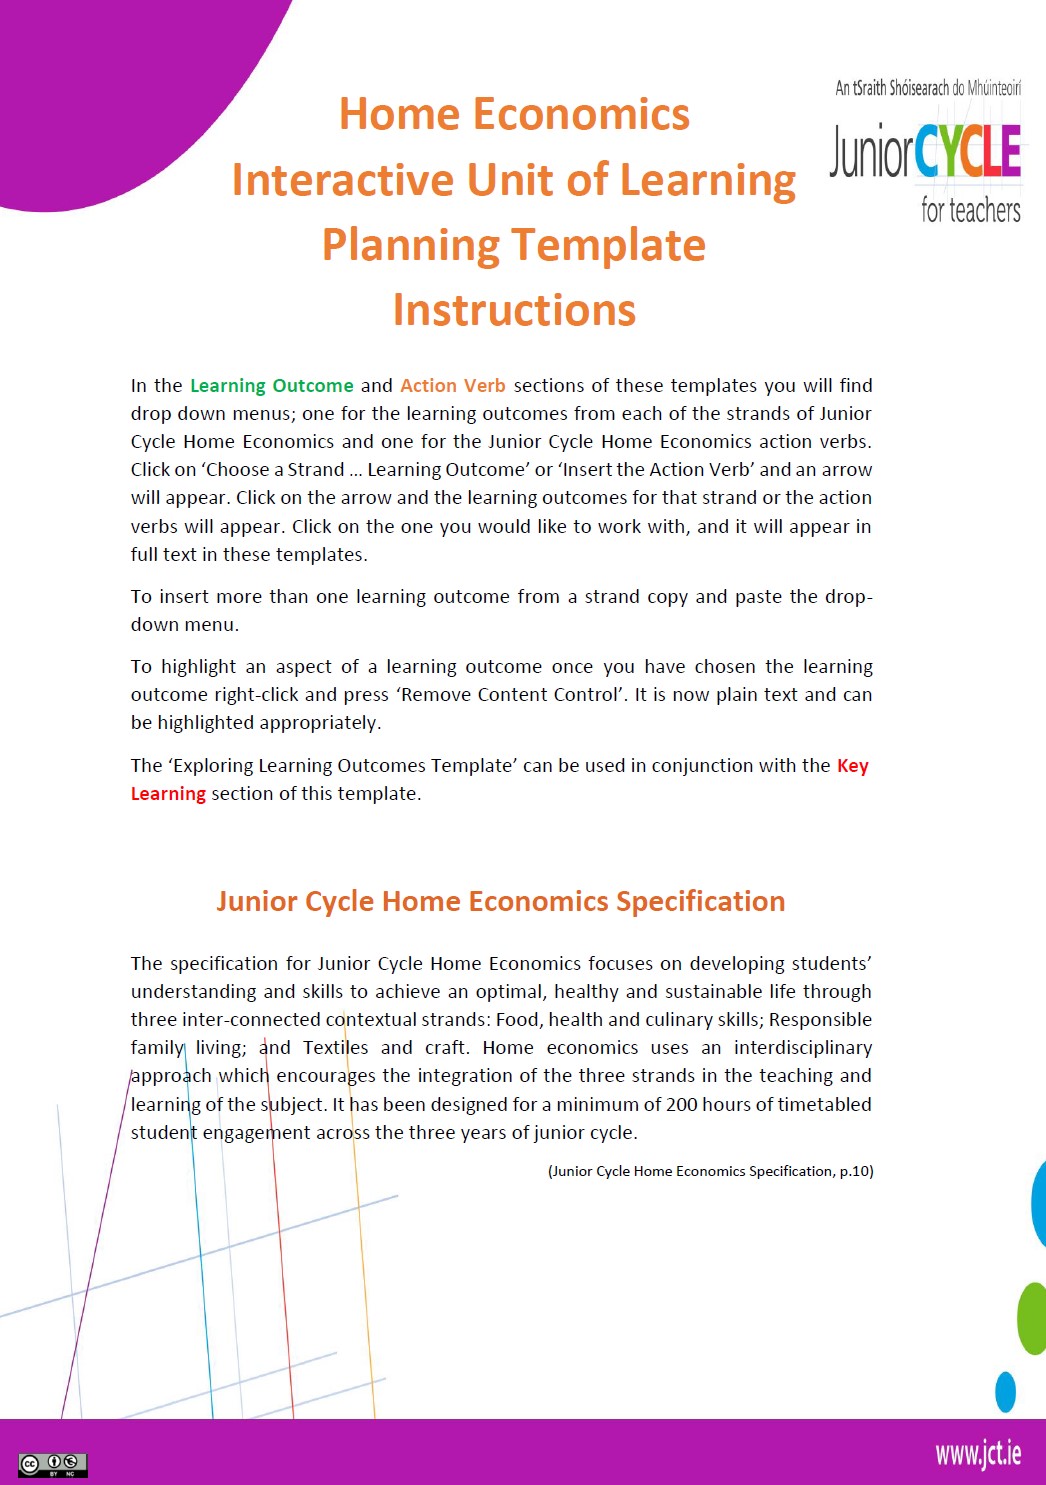 Home Economics Interactive Unit of Learning Planning Template Instructions